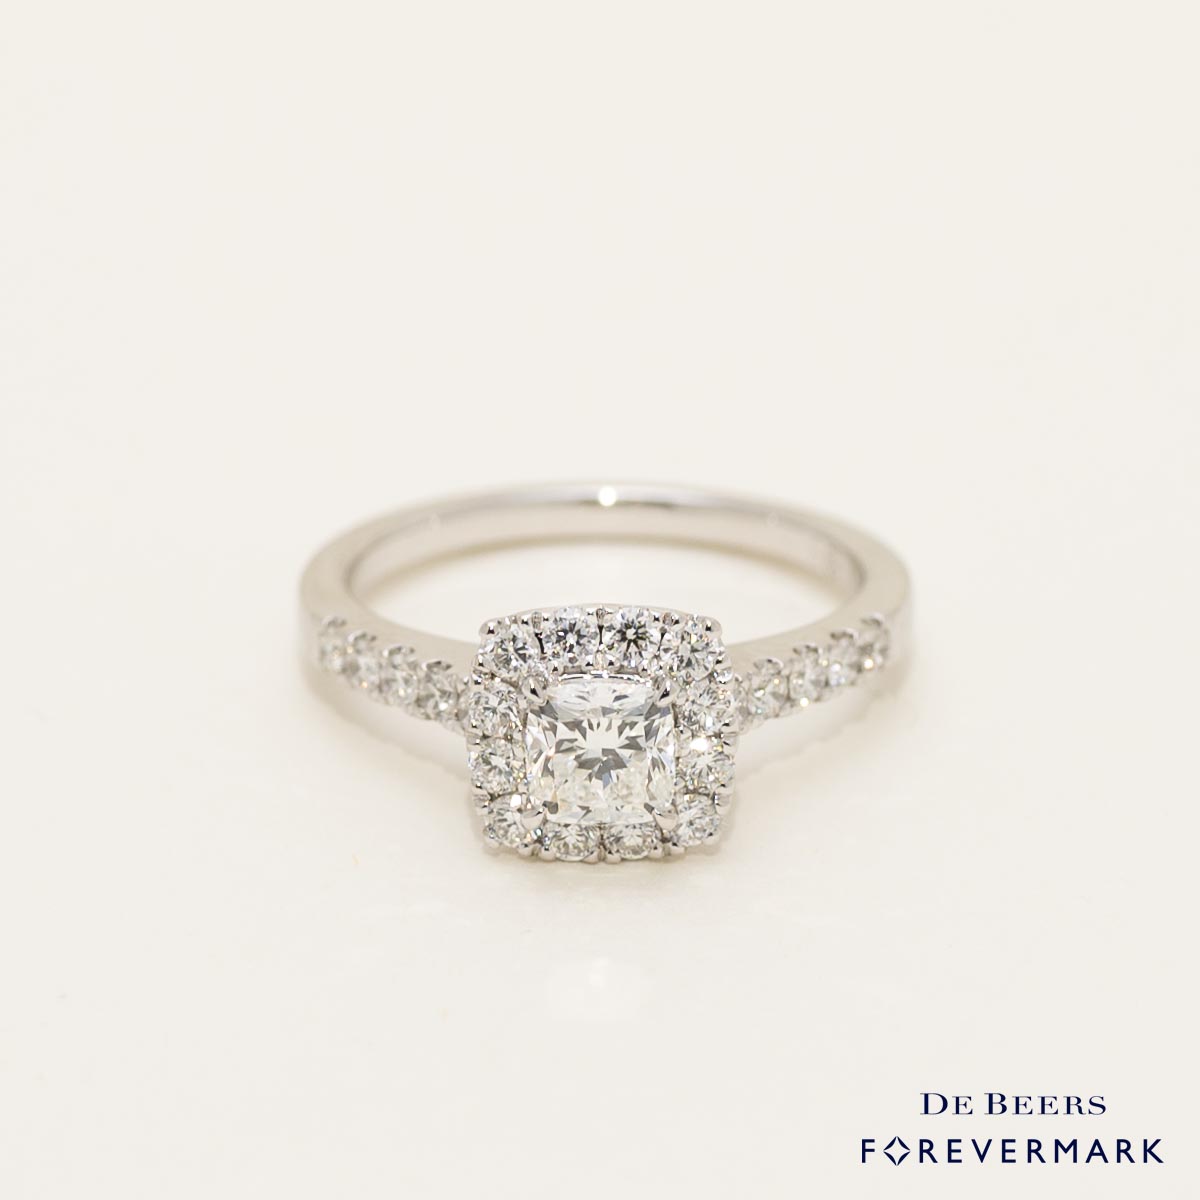 De Beers Forevermark Cushion Diamond Halo Engagement Ring in 14kt White Gold (1ct tw)